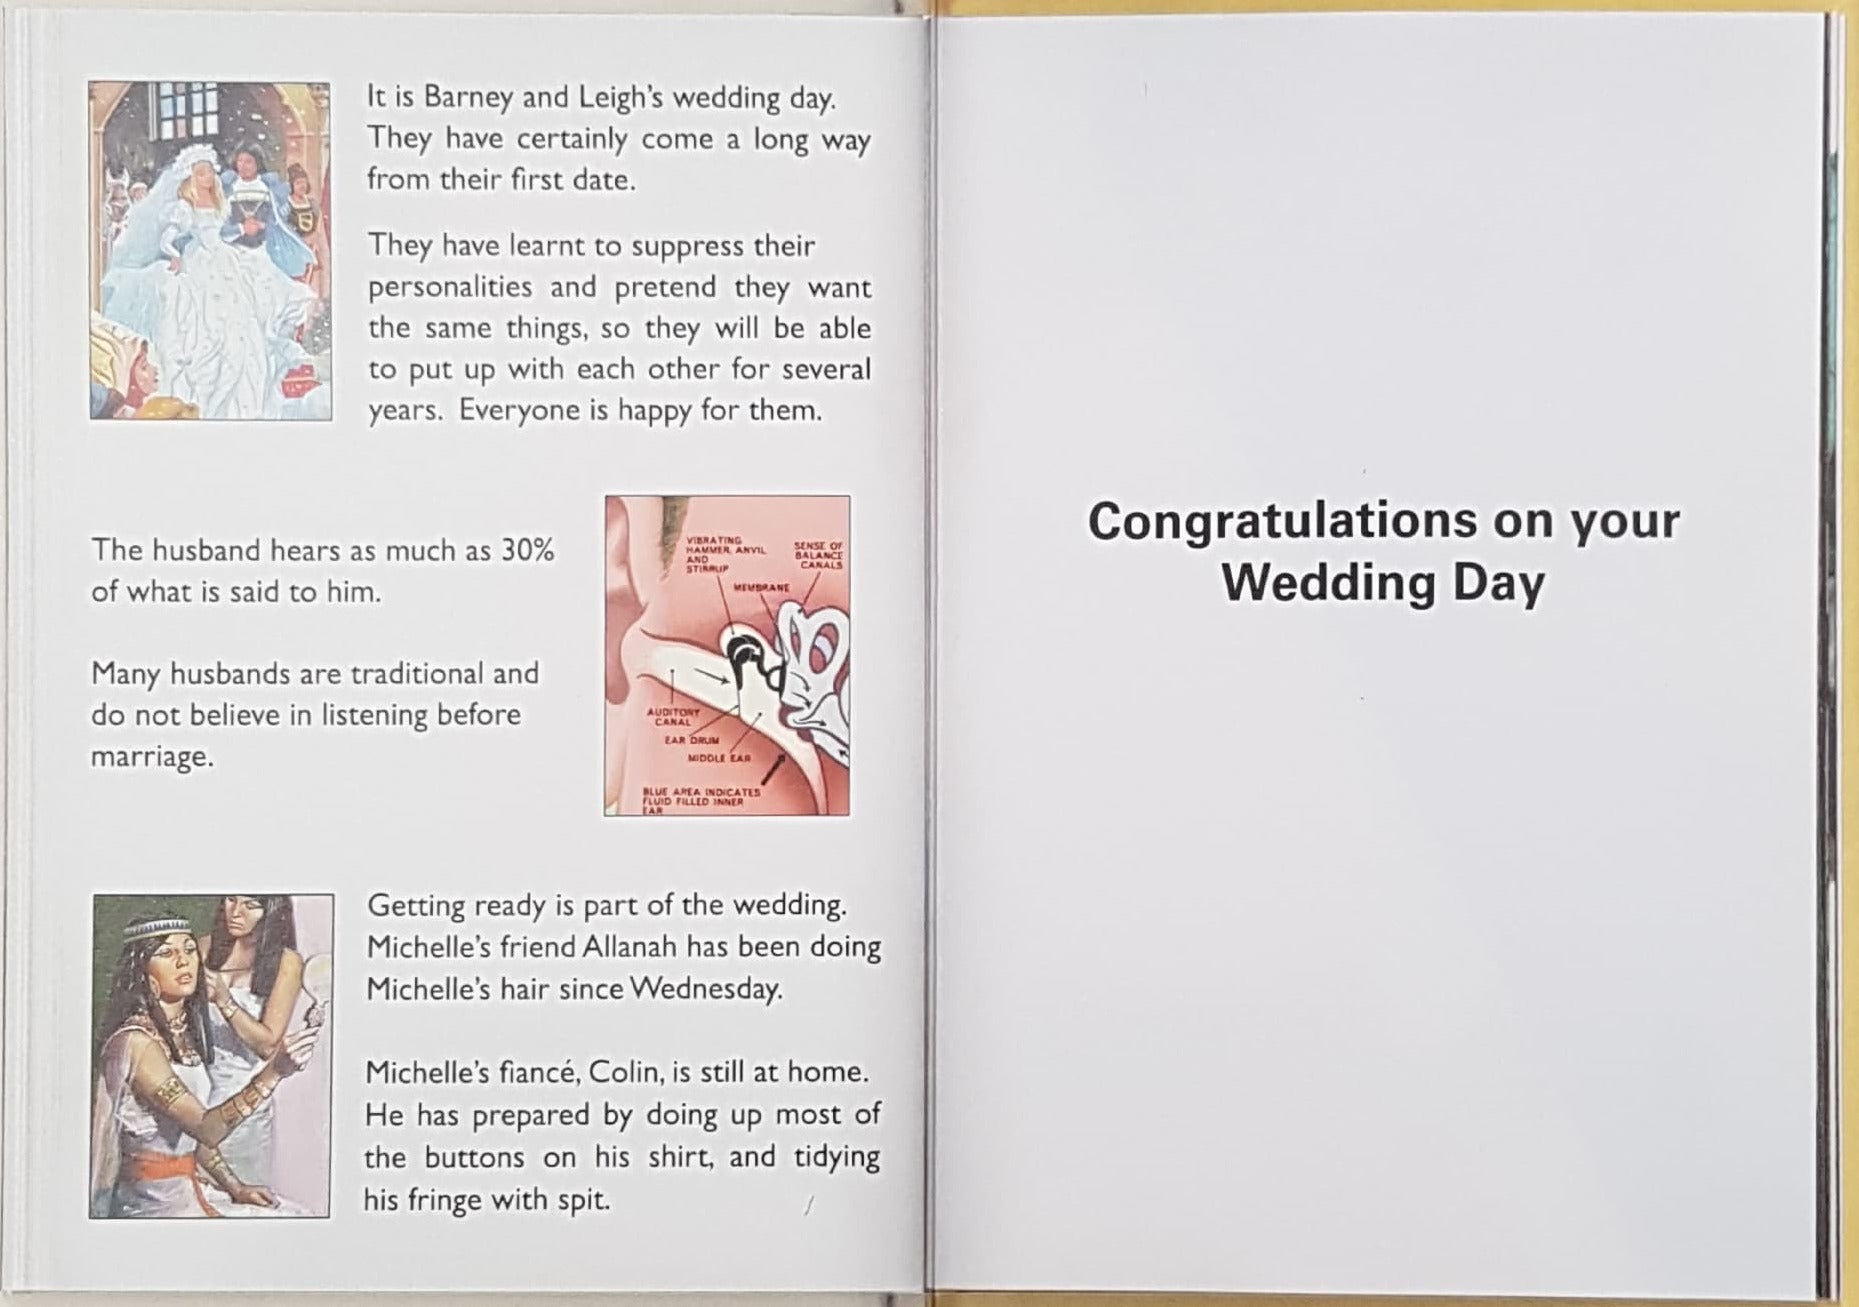 Wedding Card - General / A Ladybird Guide To Marital Bliss (Humour)